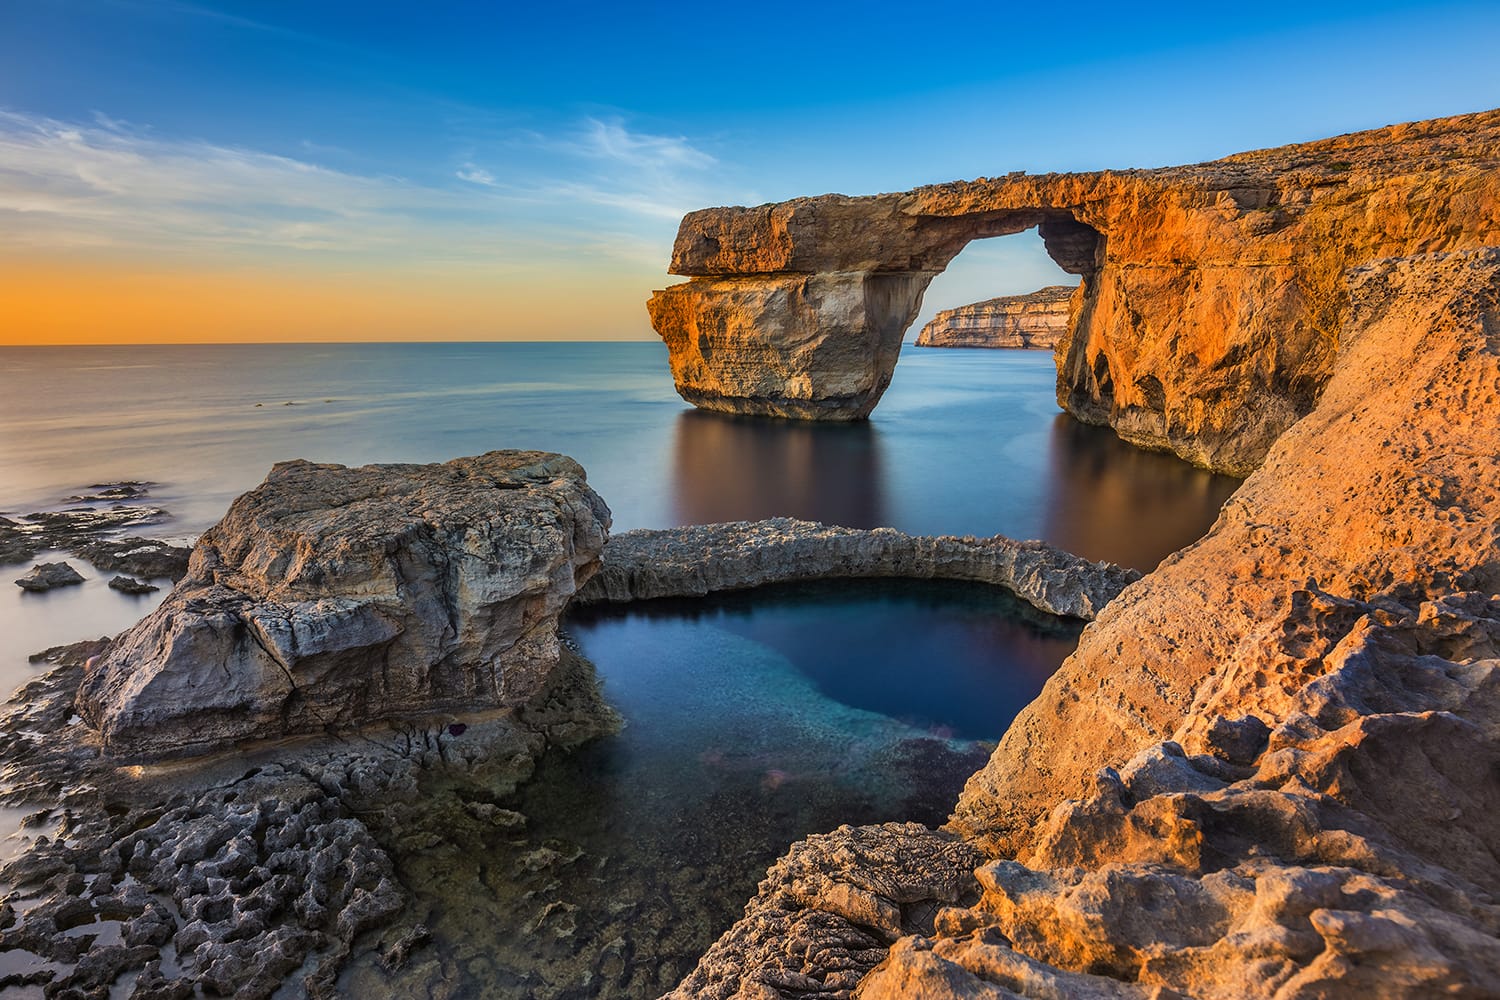 The beautiful Azure Window, a natural arch and famous landmark on the island of Gozo, Malta